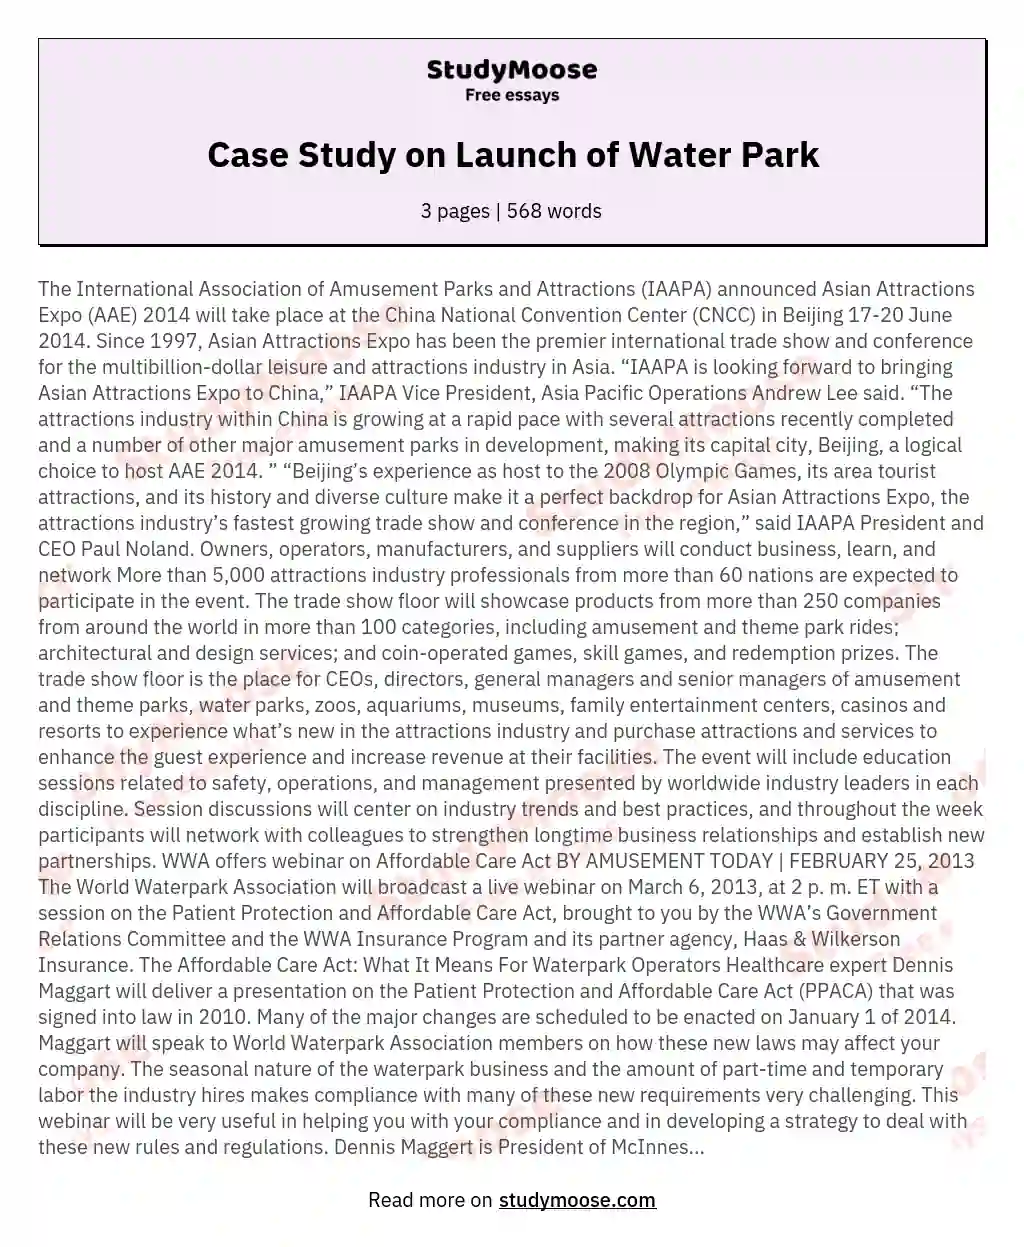 Case Study on Launch of Water Park essay